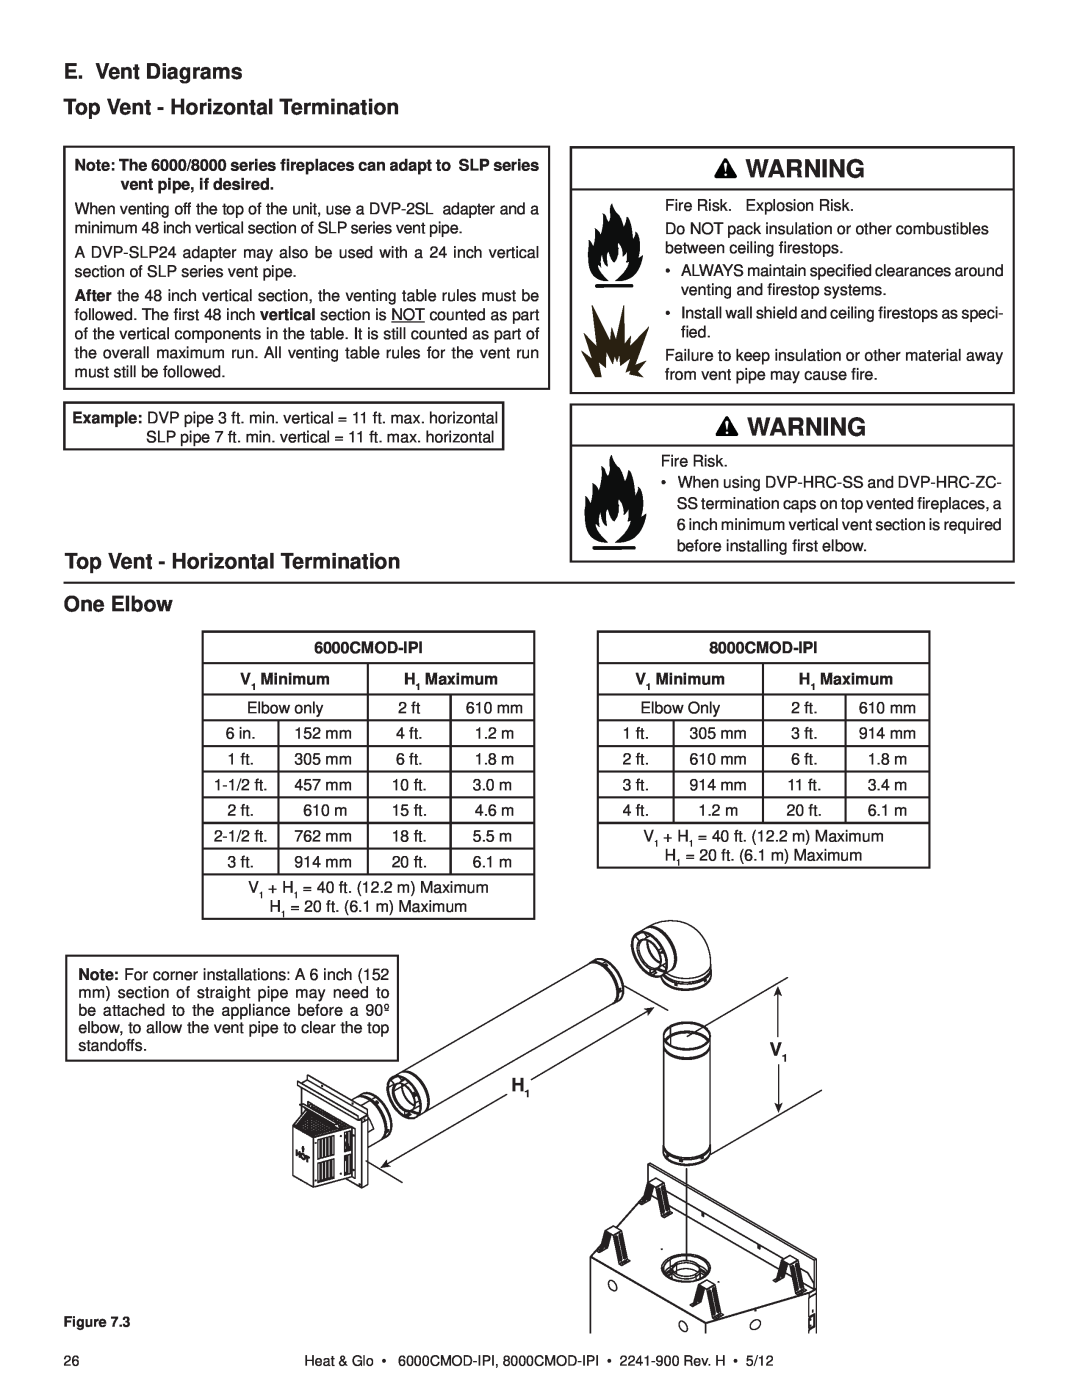 Heat & Glo LifeStyle 8000CMOD-IPI E. Vent Diagrams, Top Vent - Horizontal Termination, One Elbow, vent pipe, if desired 